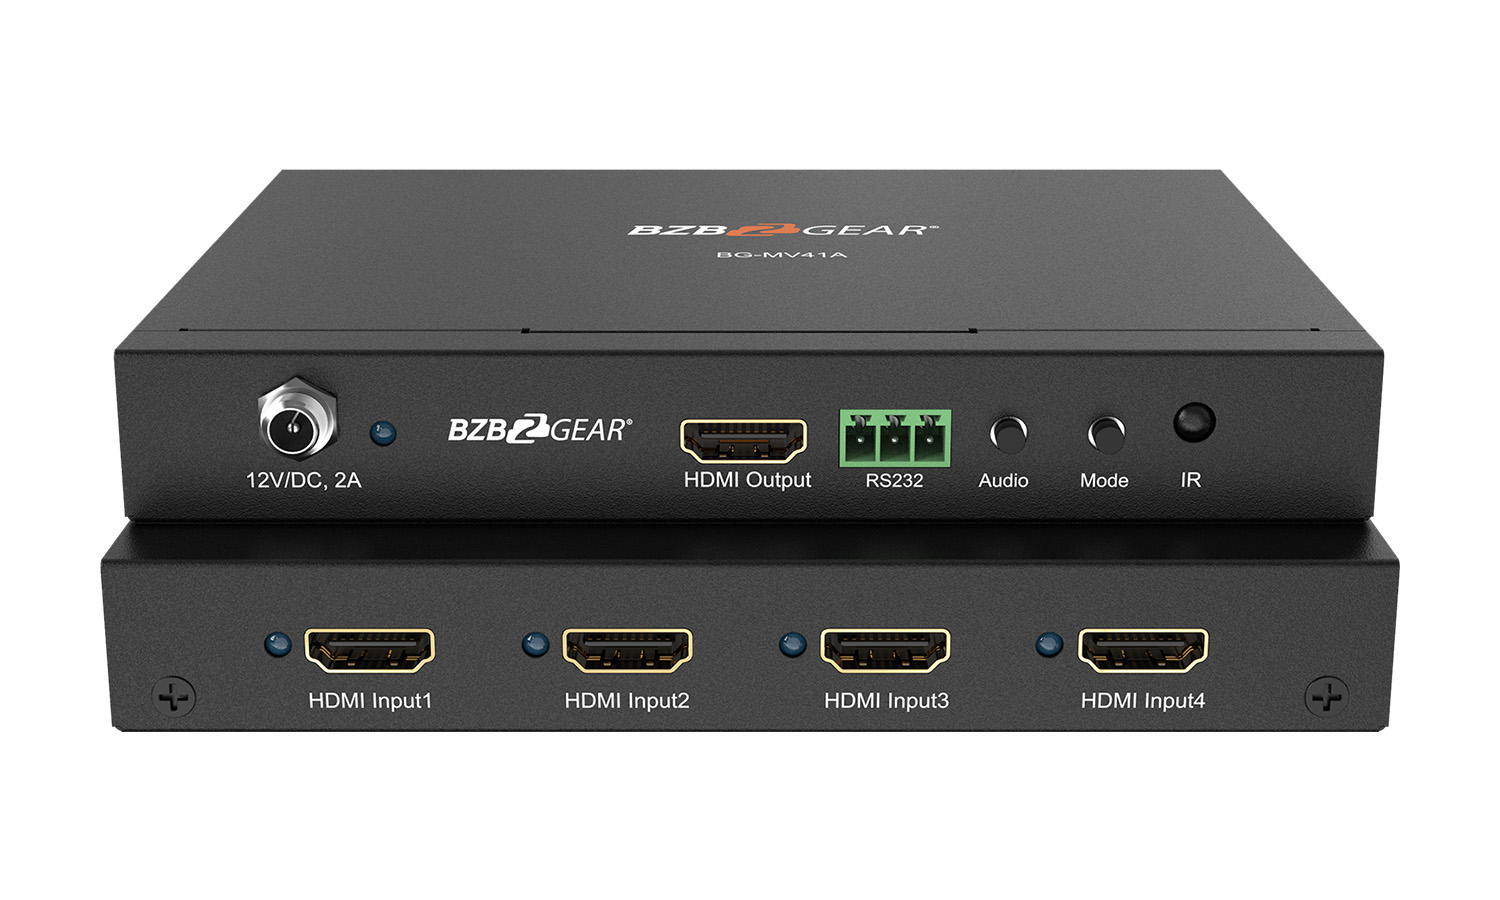 BG-MV41A 4X1 Multiviewer with Scaler supporting multi output resolutions up to 1080P/60Hz by BZBGEAR